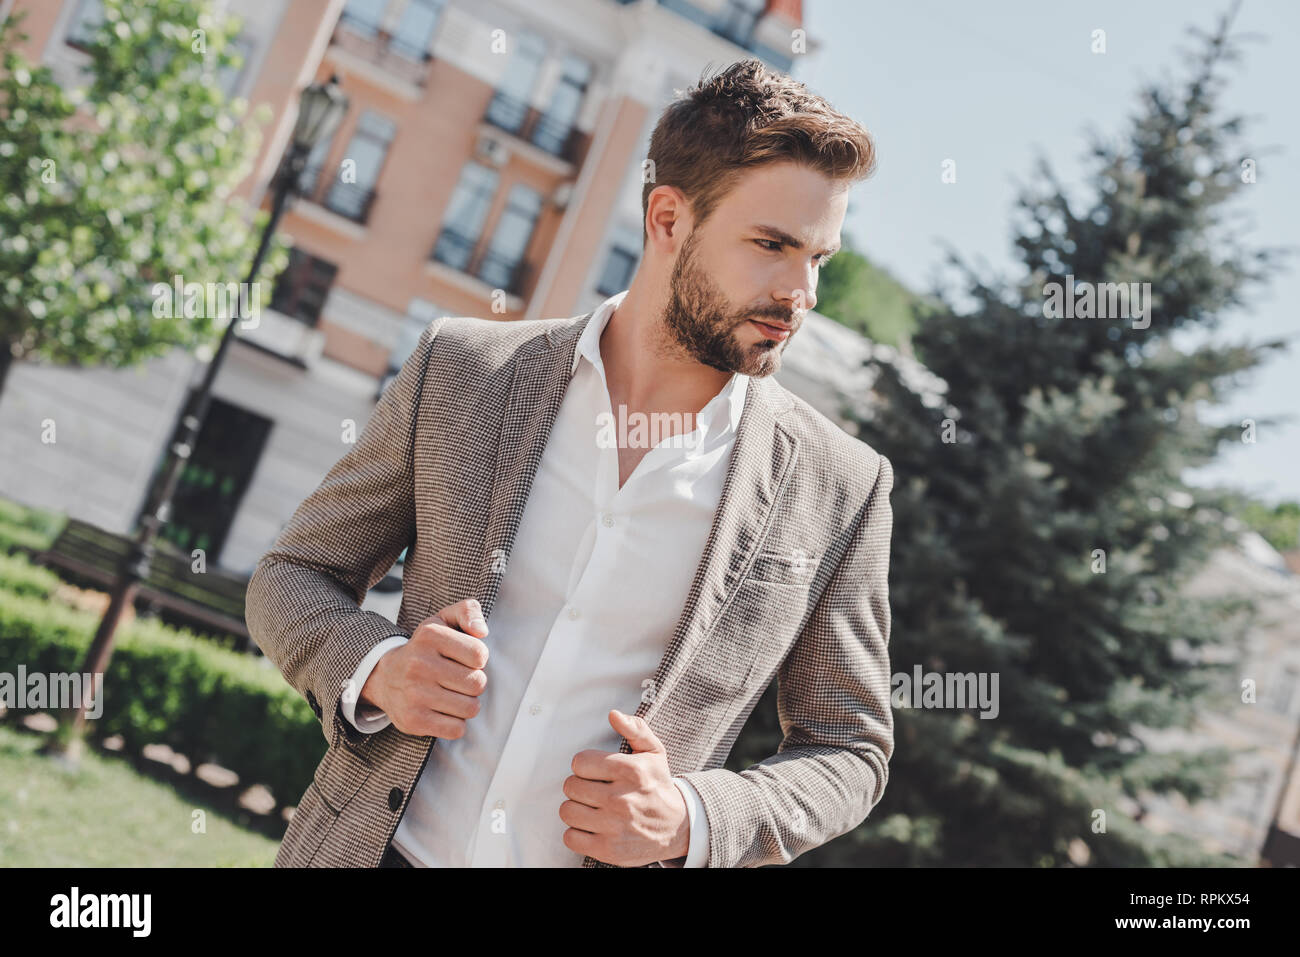 Handsome young businessman walking on city street in the morning going to  work in office wear smart casual outfit of brown jacket and white shirt.  Urban lifestyle of young professionals Stock Photo -